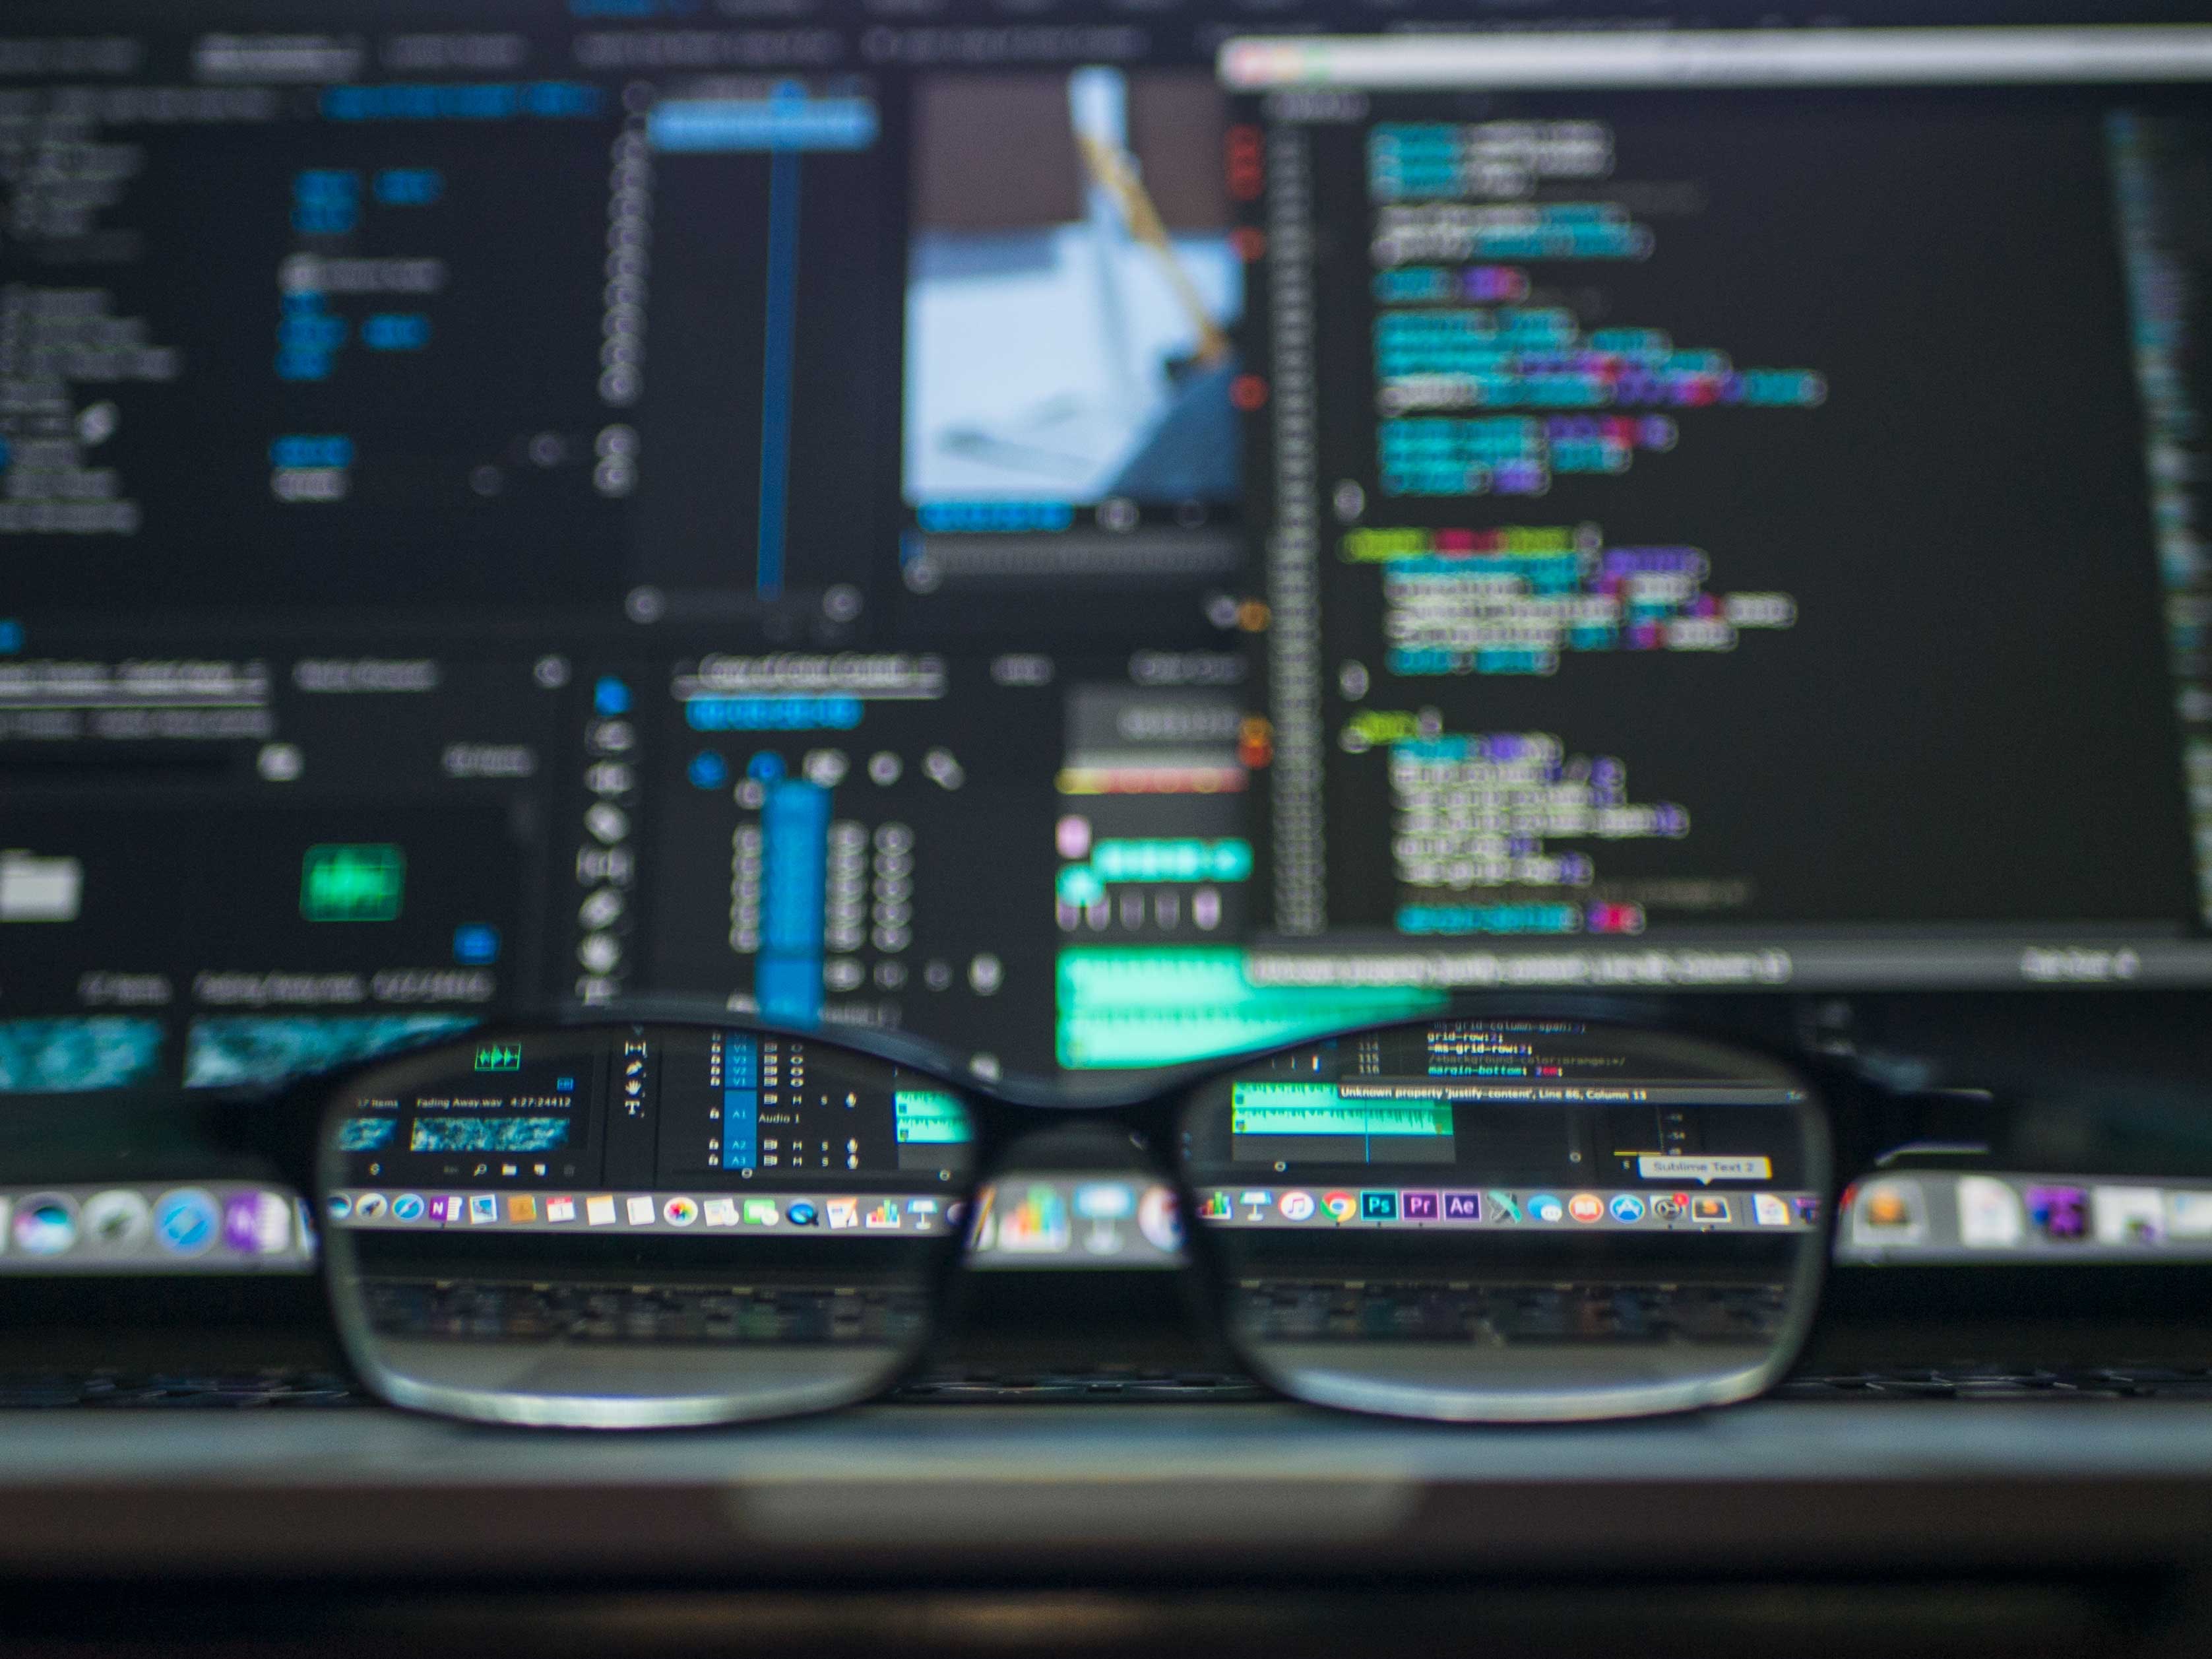 A blurry screen with computer code on it. Looking through the lens of a pair of glasses makes the code easy to read. 